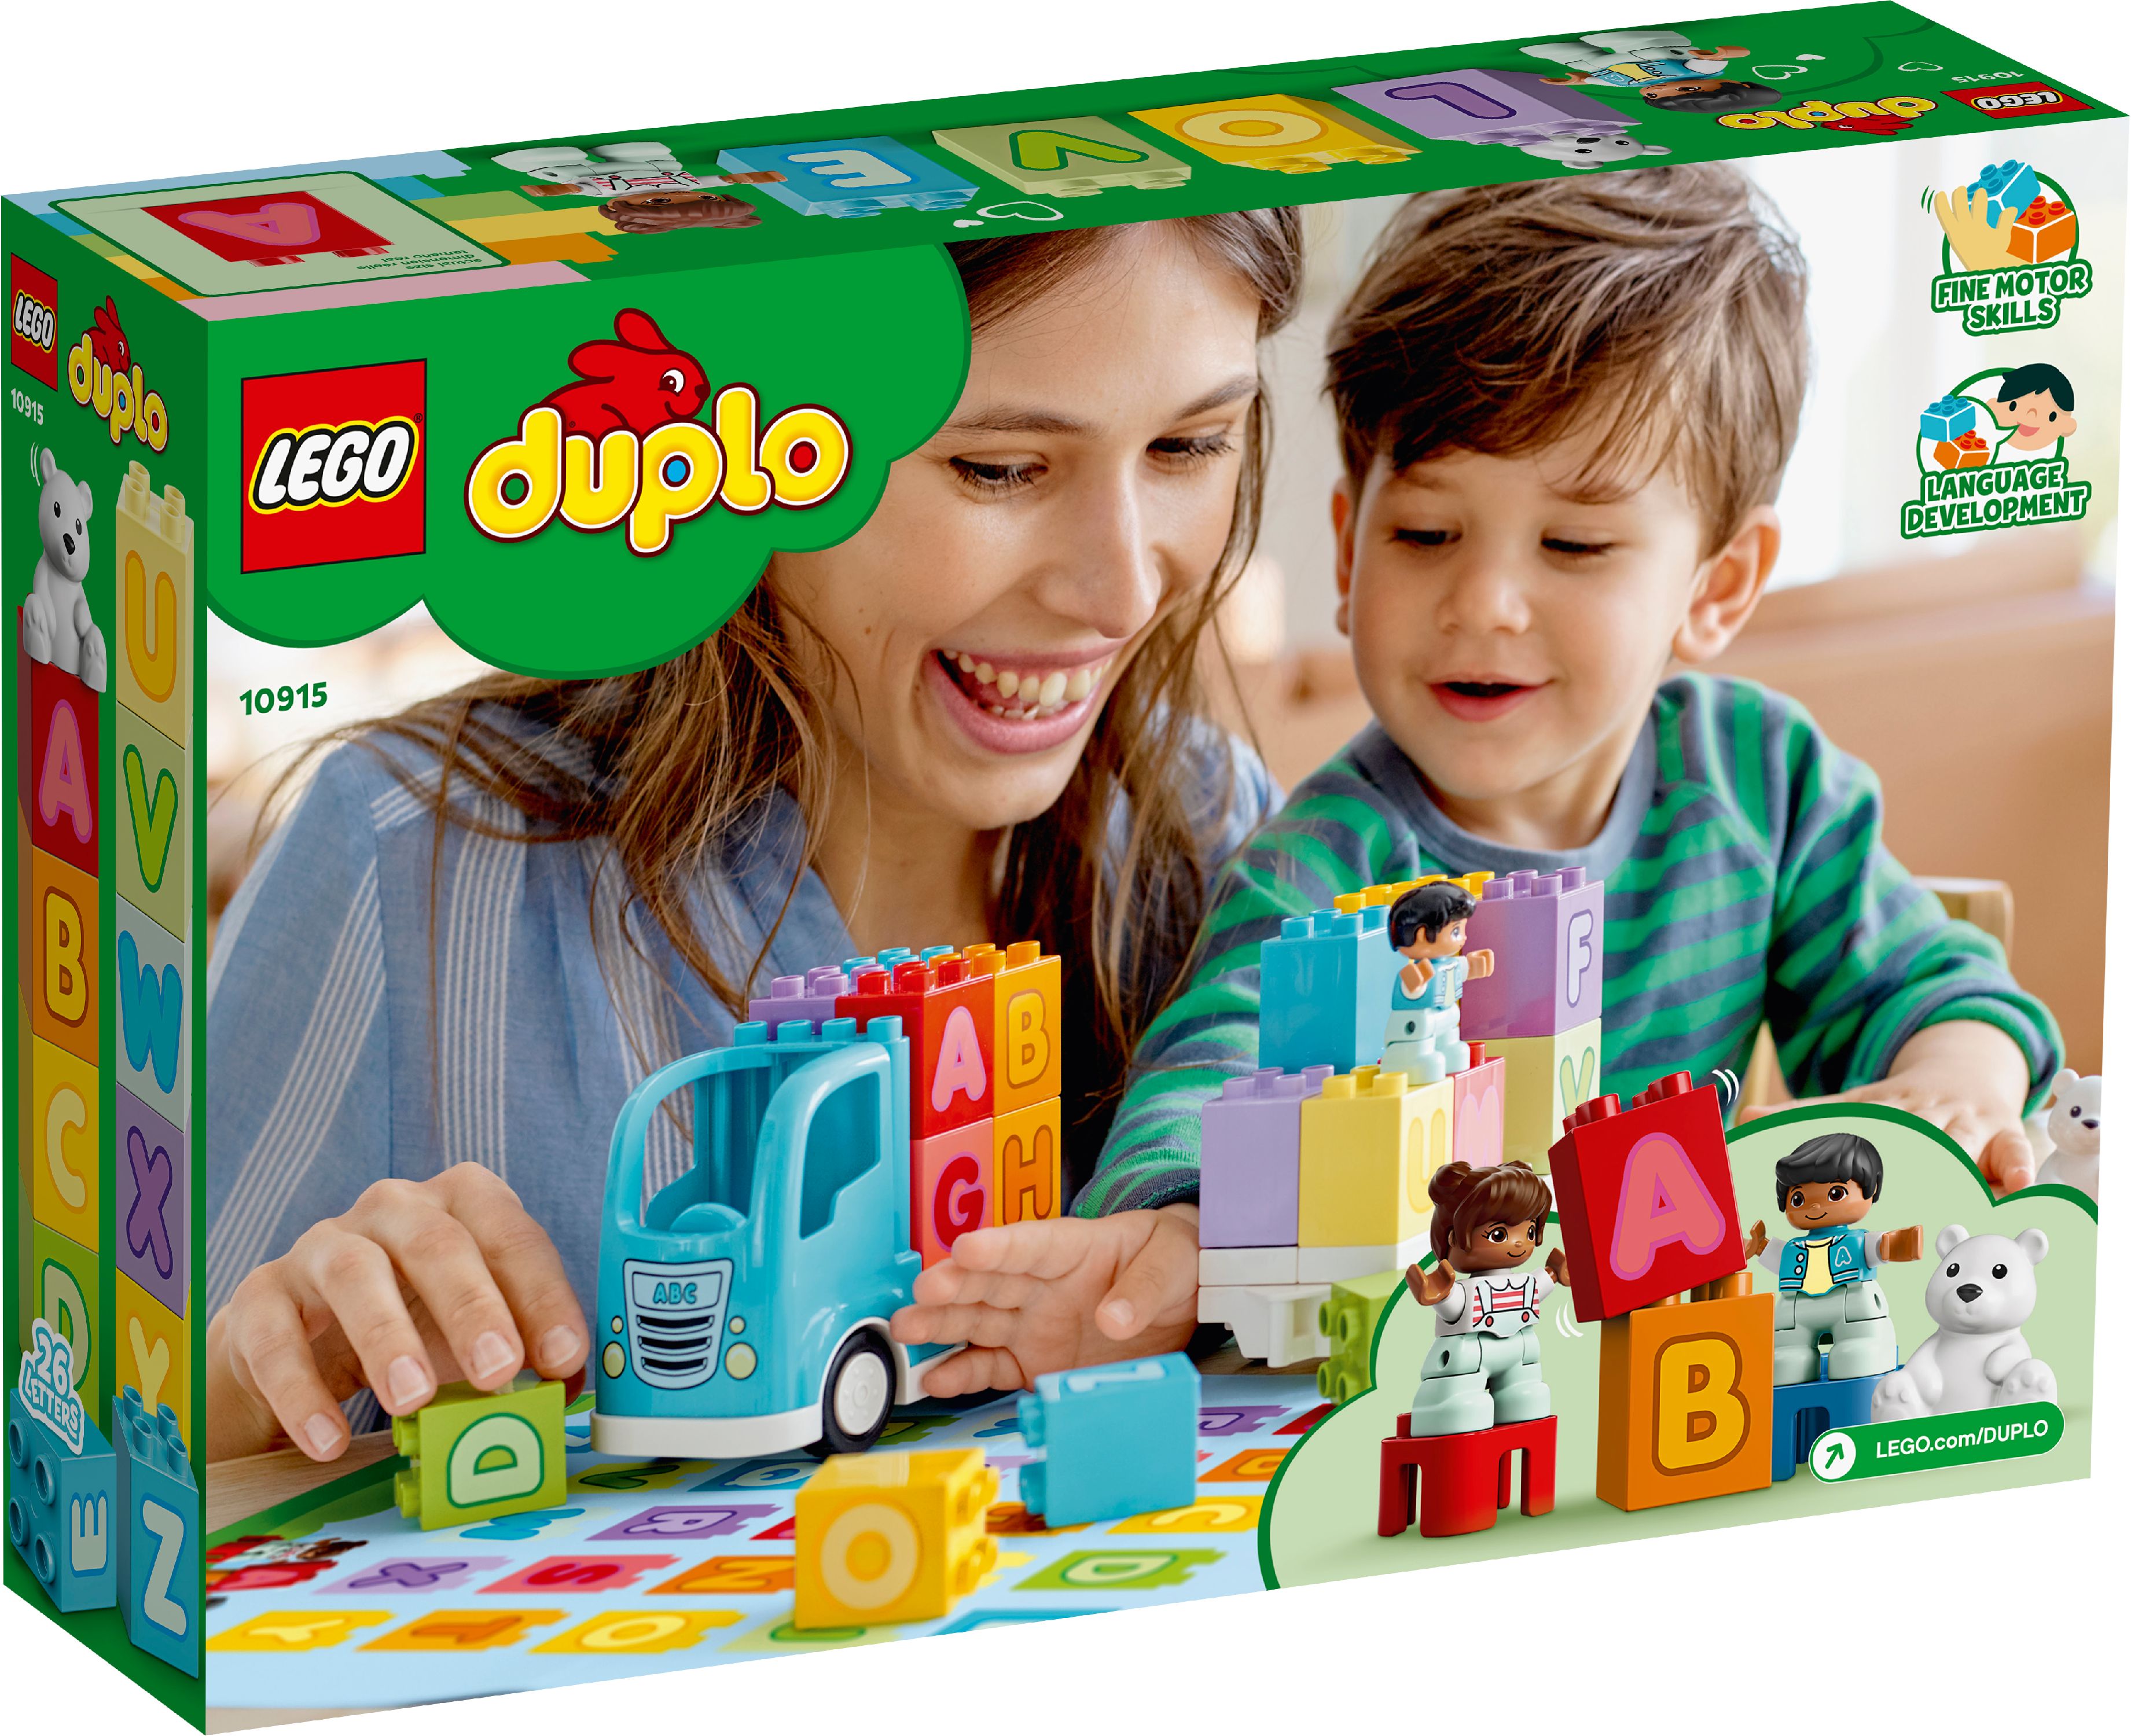 LEGO DUPLO My First Alphabet Truck 10915 Educational Building Toy for Toddlers (36 Pieces) - image 6 of 12